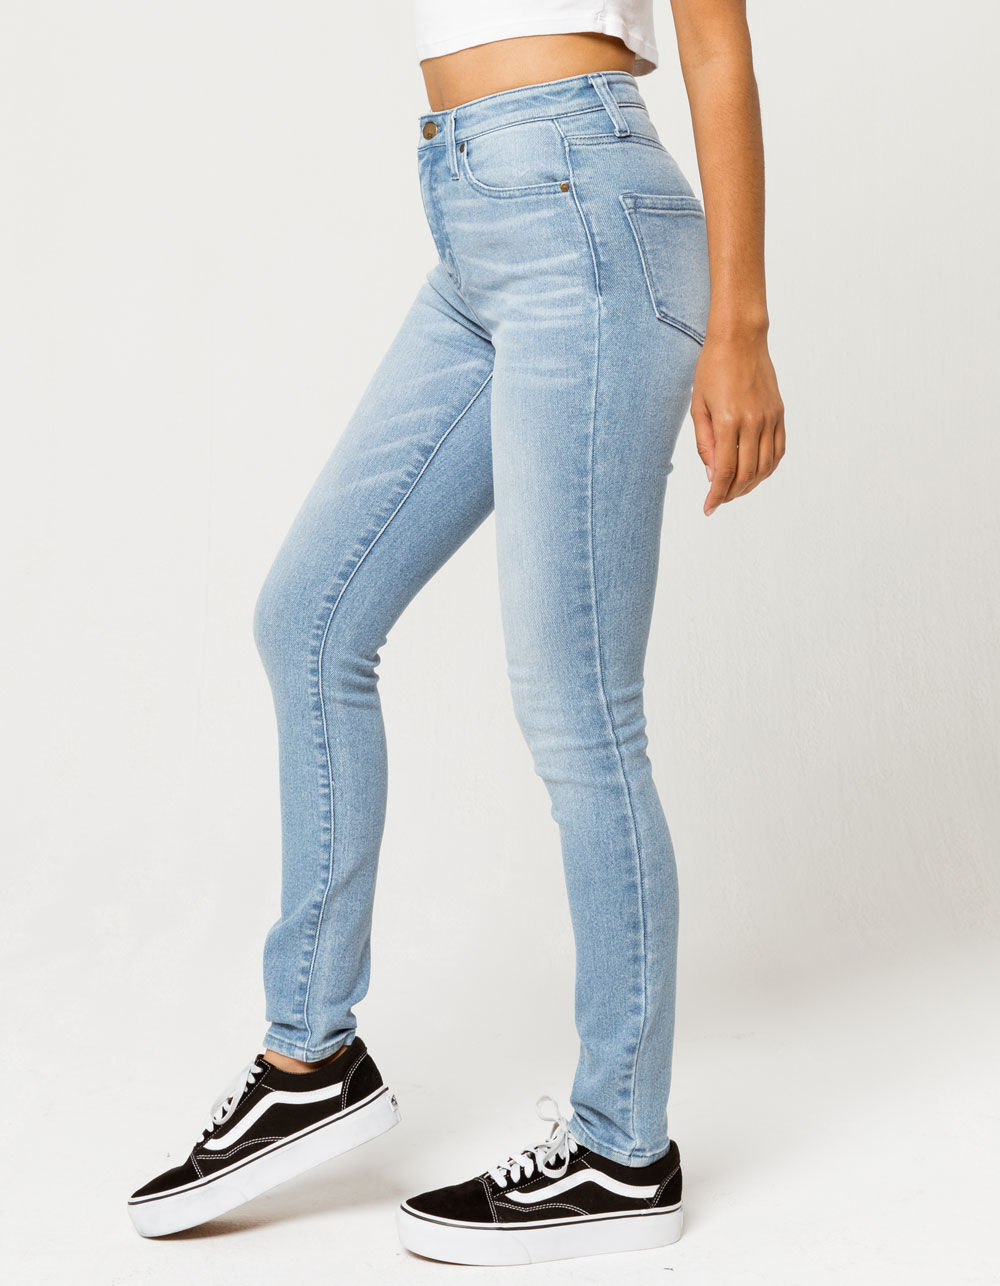 RSQ High Rise Light Wash Womens Skinny Jeans - LIGHT WASH | Tillys